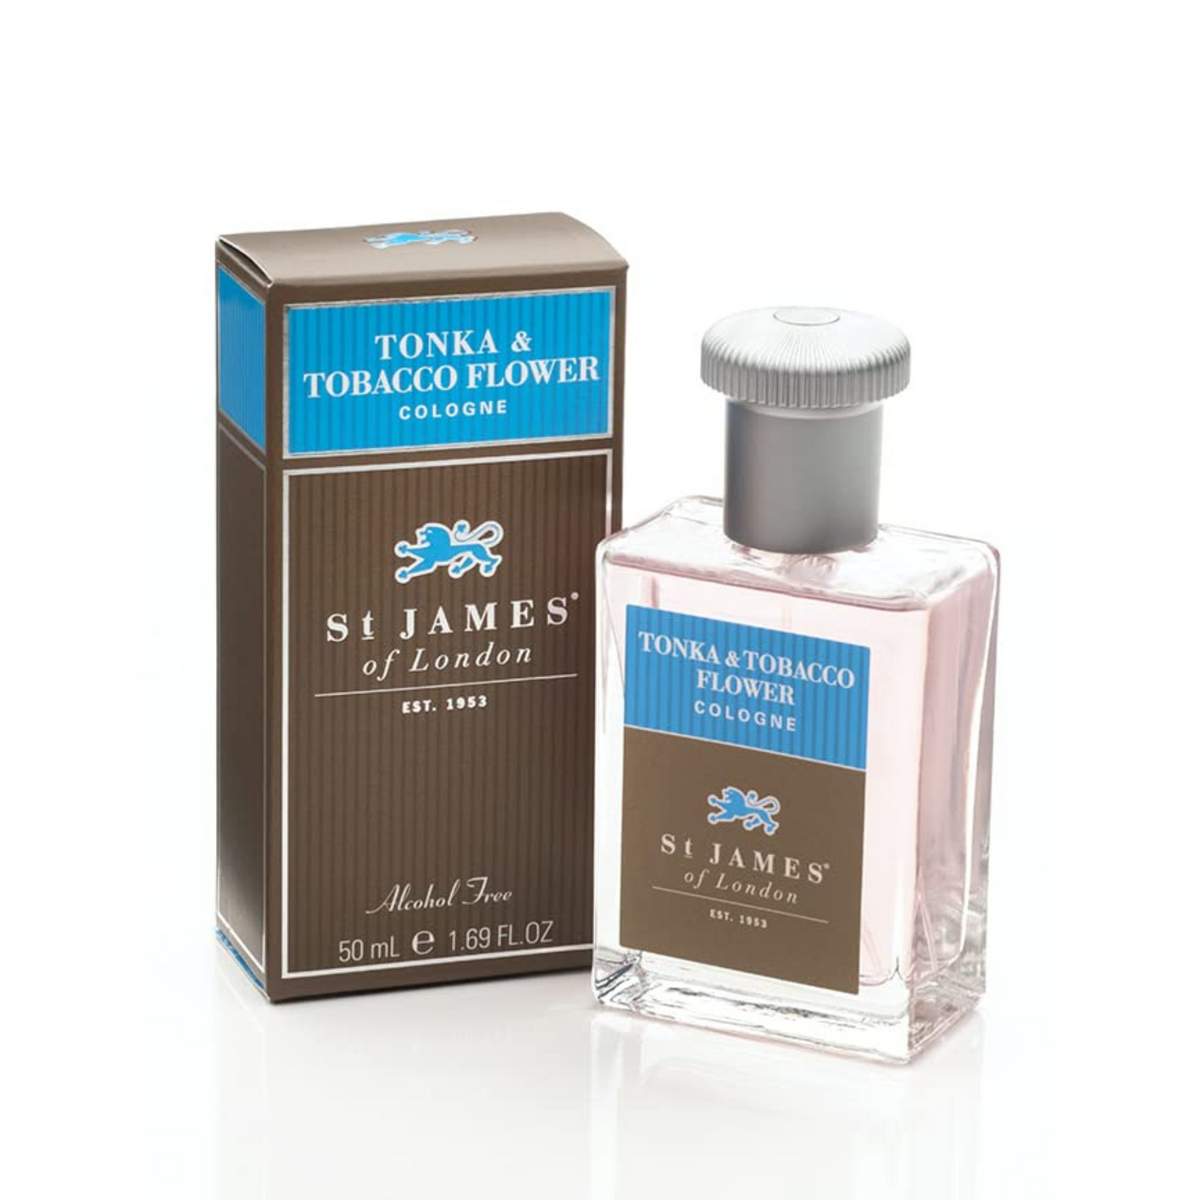 Primary Image of St. James of London Tonka & Tobacco Flower Cologne (50 ml)